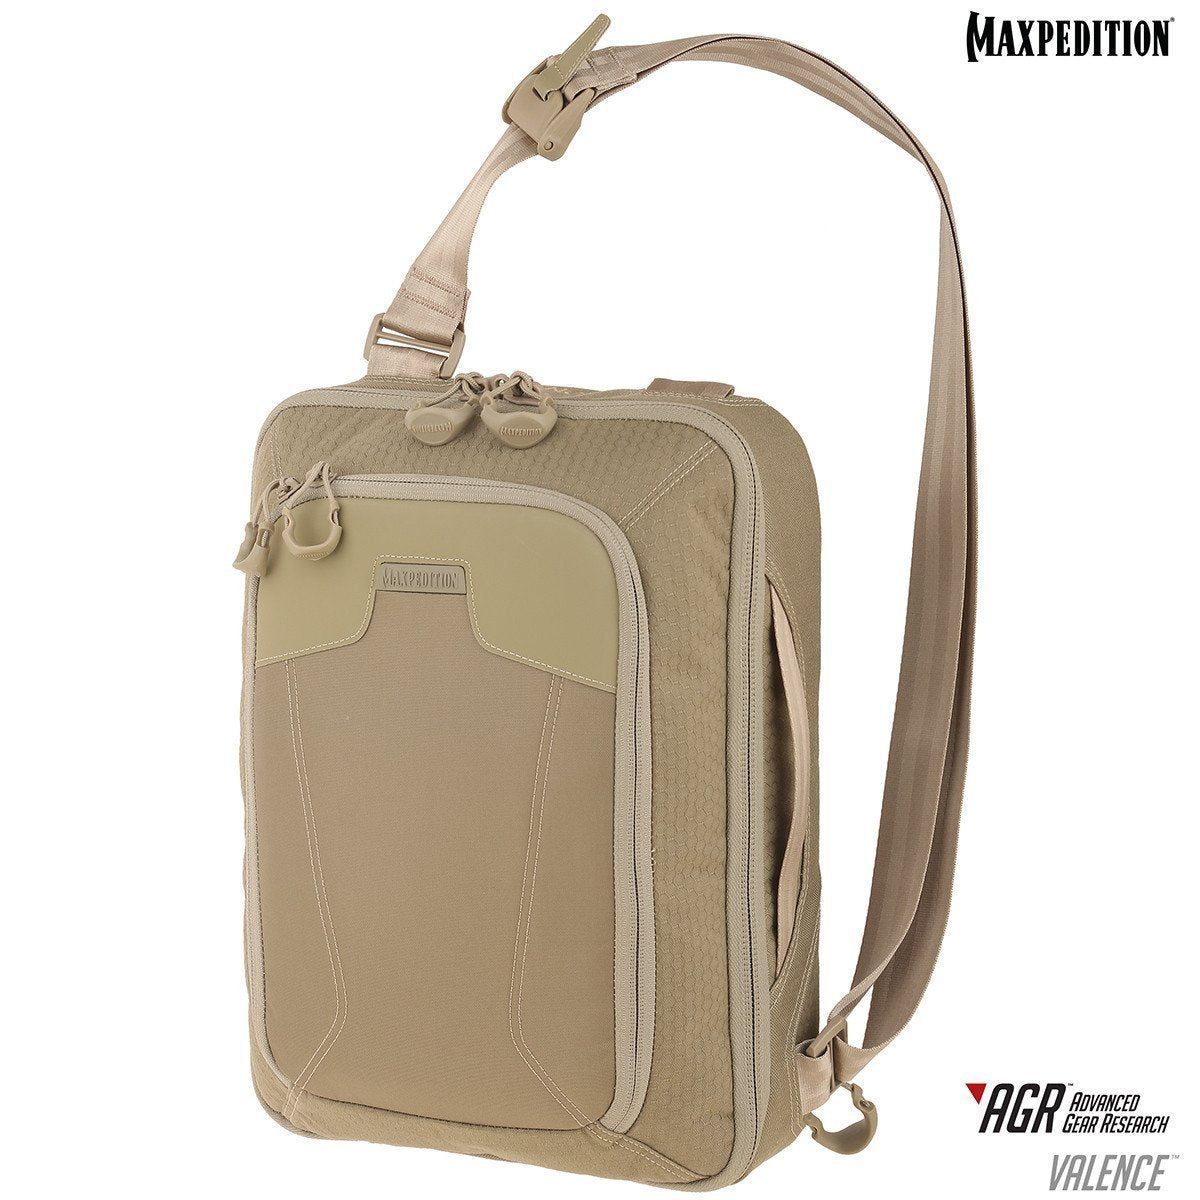 Valence™ Tech Sling Pack | Maxpedition Tactical Gear